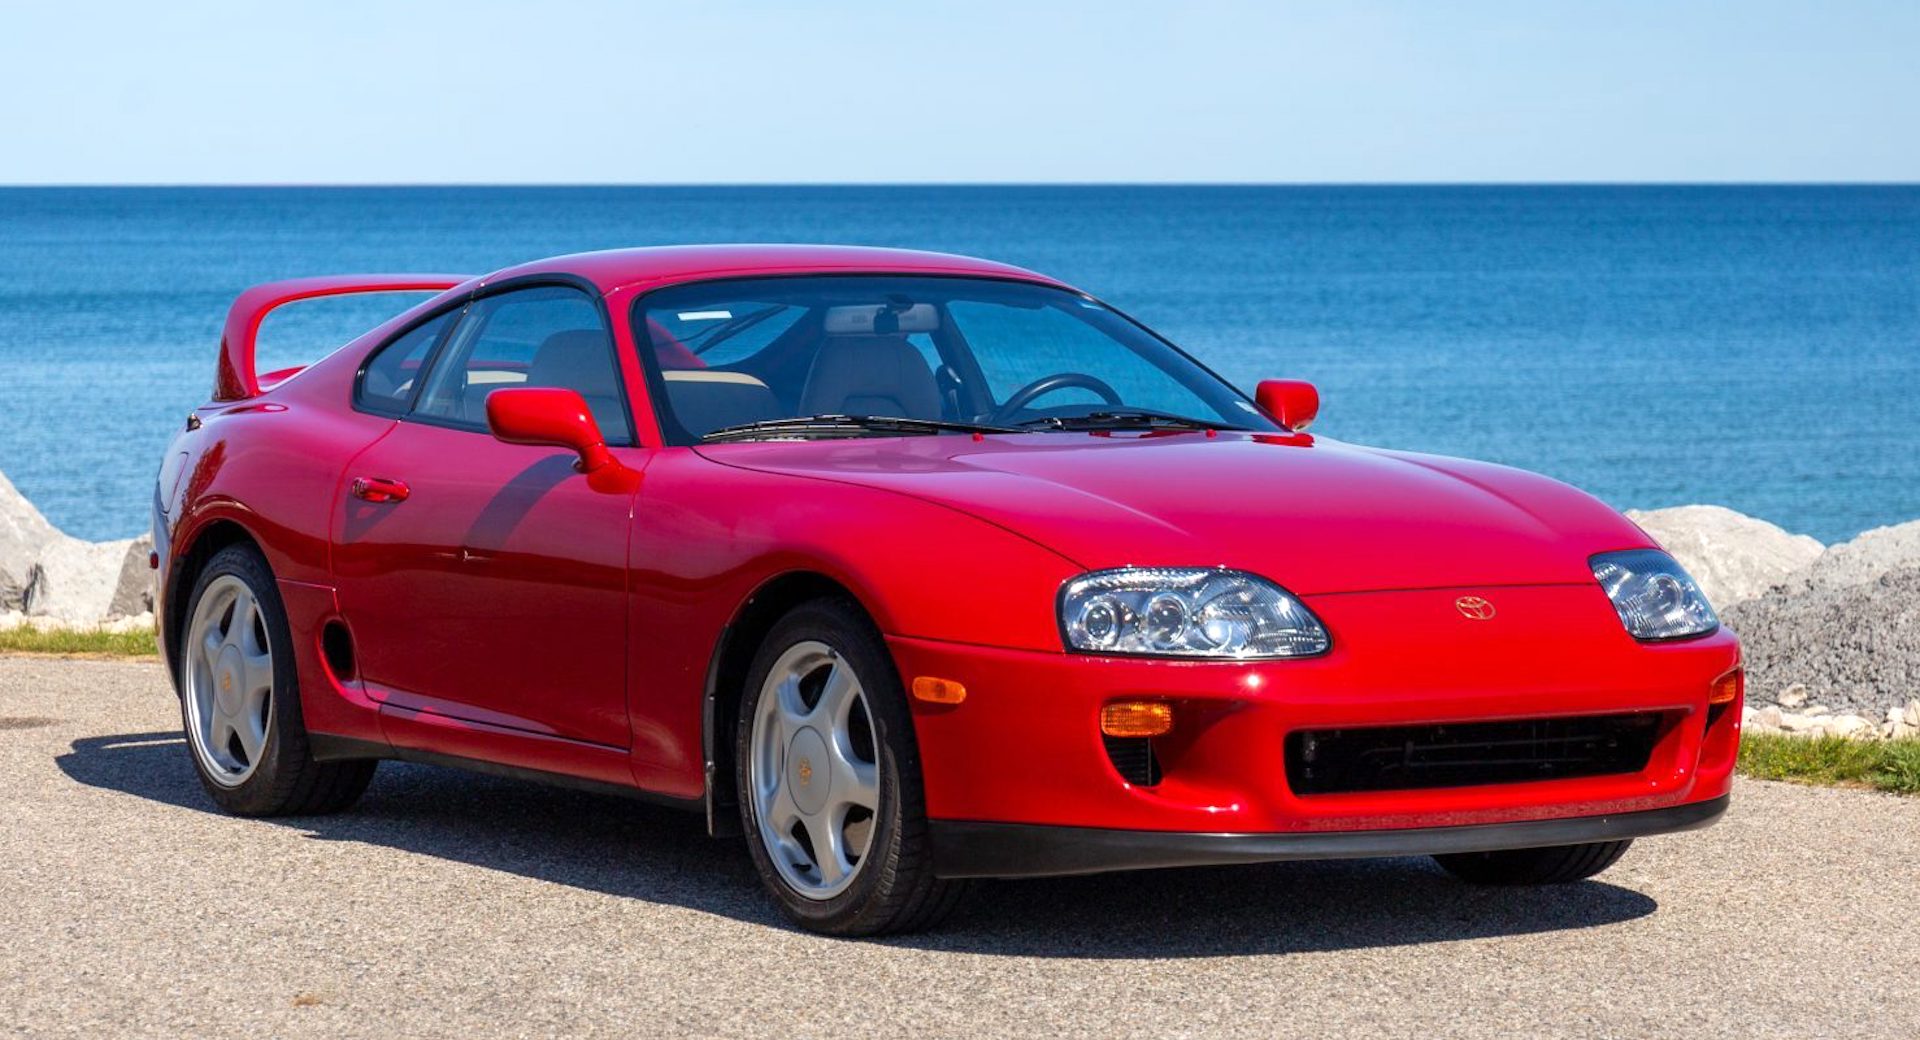 Toyota Supra MK4  Over Hyped or Legendary? 